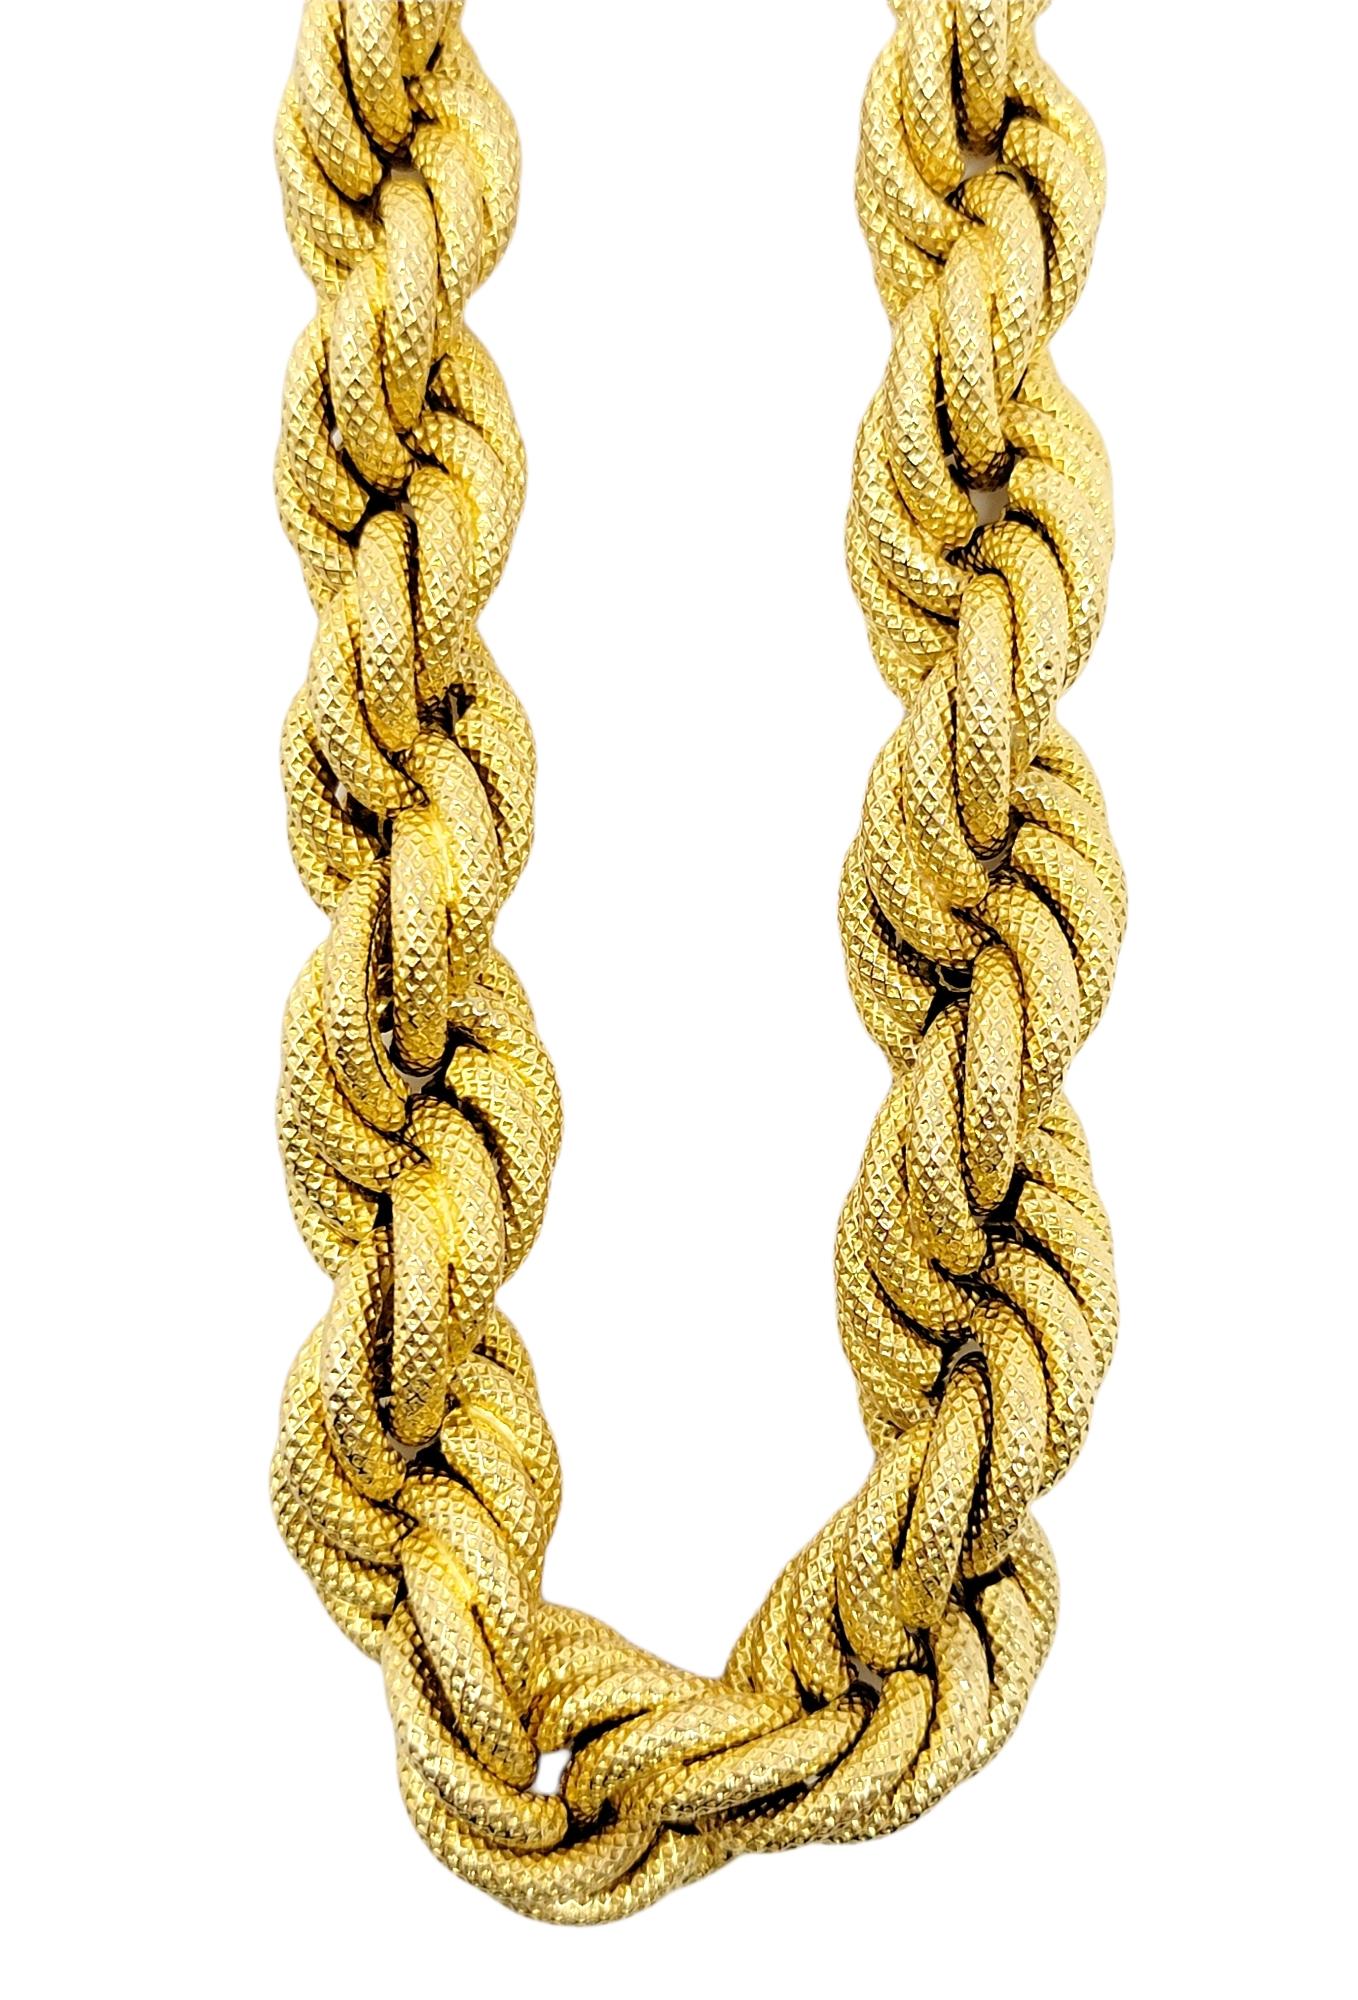 Luxurious yellow gold rope link necklace will stand the test of time. The classic design gently hugs the neck and exudes a sophisticated elegance. Featuring a twisted rope motif with a textured finish, the graduated design is slightly chunky in